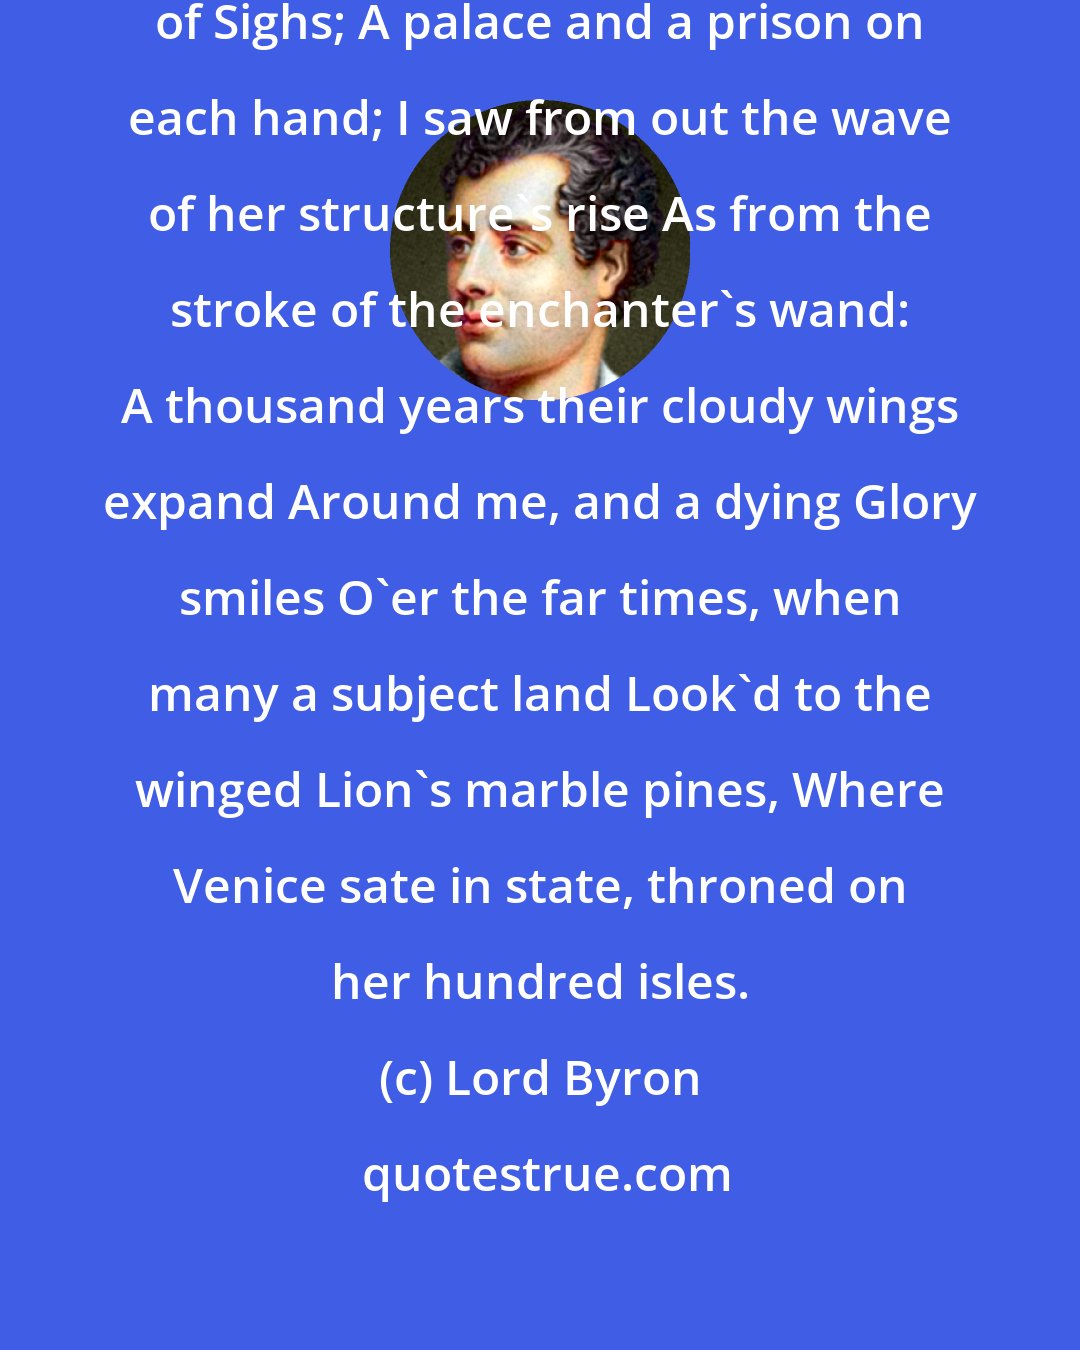 Lord Byron: I stood in Venice, on the Bridge of Sighs; A palace and a prison on each hand; I saw from out the wave of her structure's rise As from the stroke of the enchanter's wand: A thousand years their cloudy wings expand Around me, and a dying Glory smiles O'er the far times, when many a subject land Look'd to the winged Lion's marble pines, Where Venice sate in state, throned on her hundred isles.